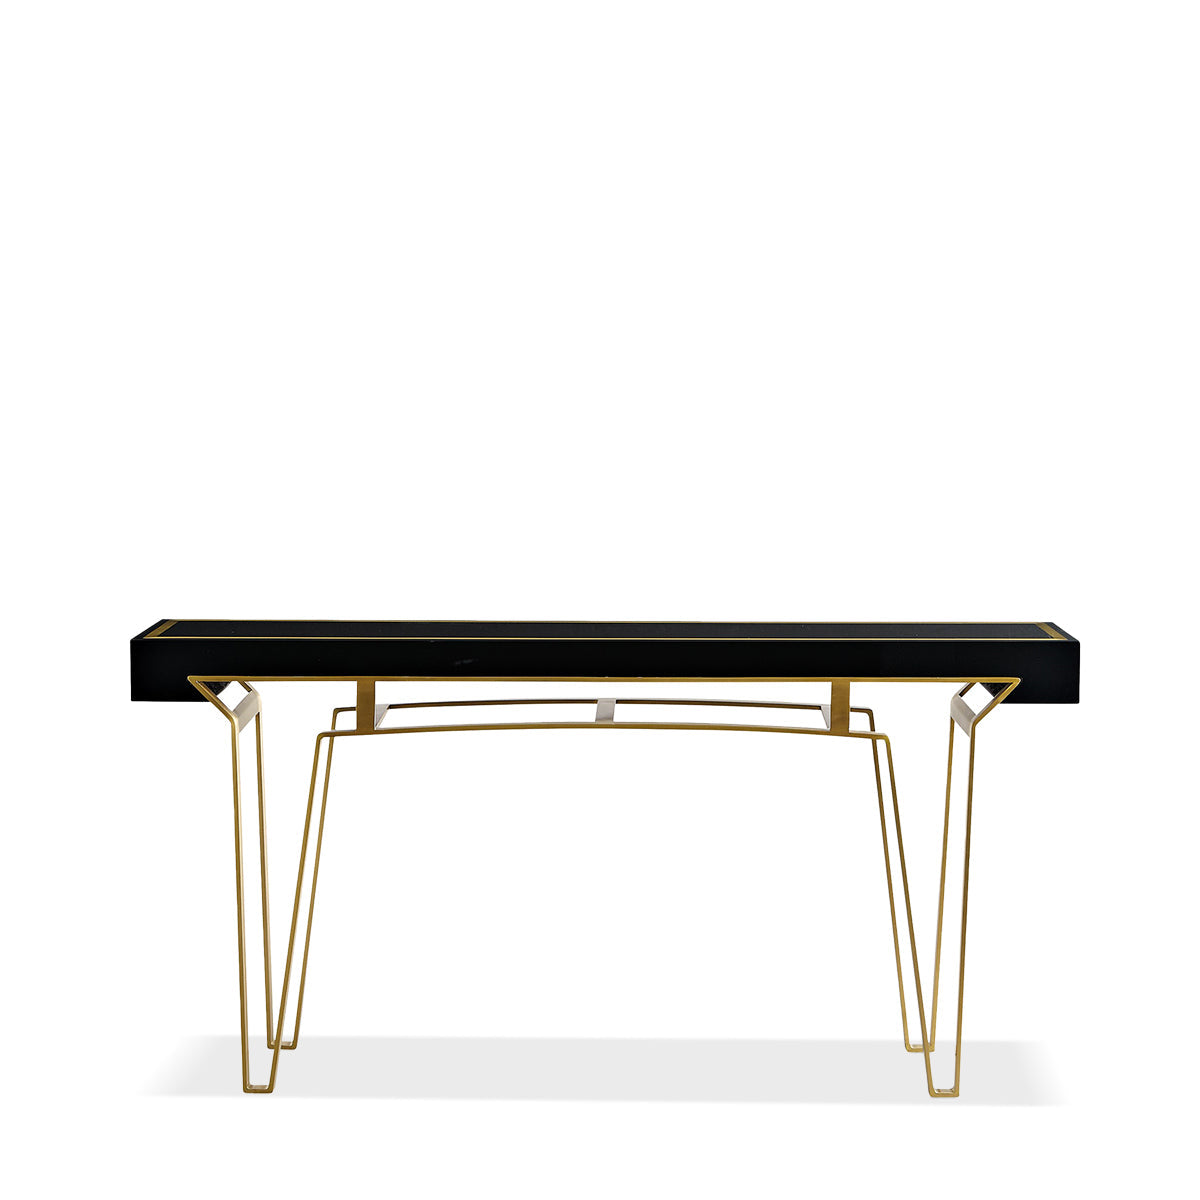 THE MODERNISTE CONSOLE TABLE